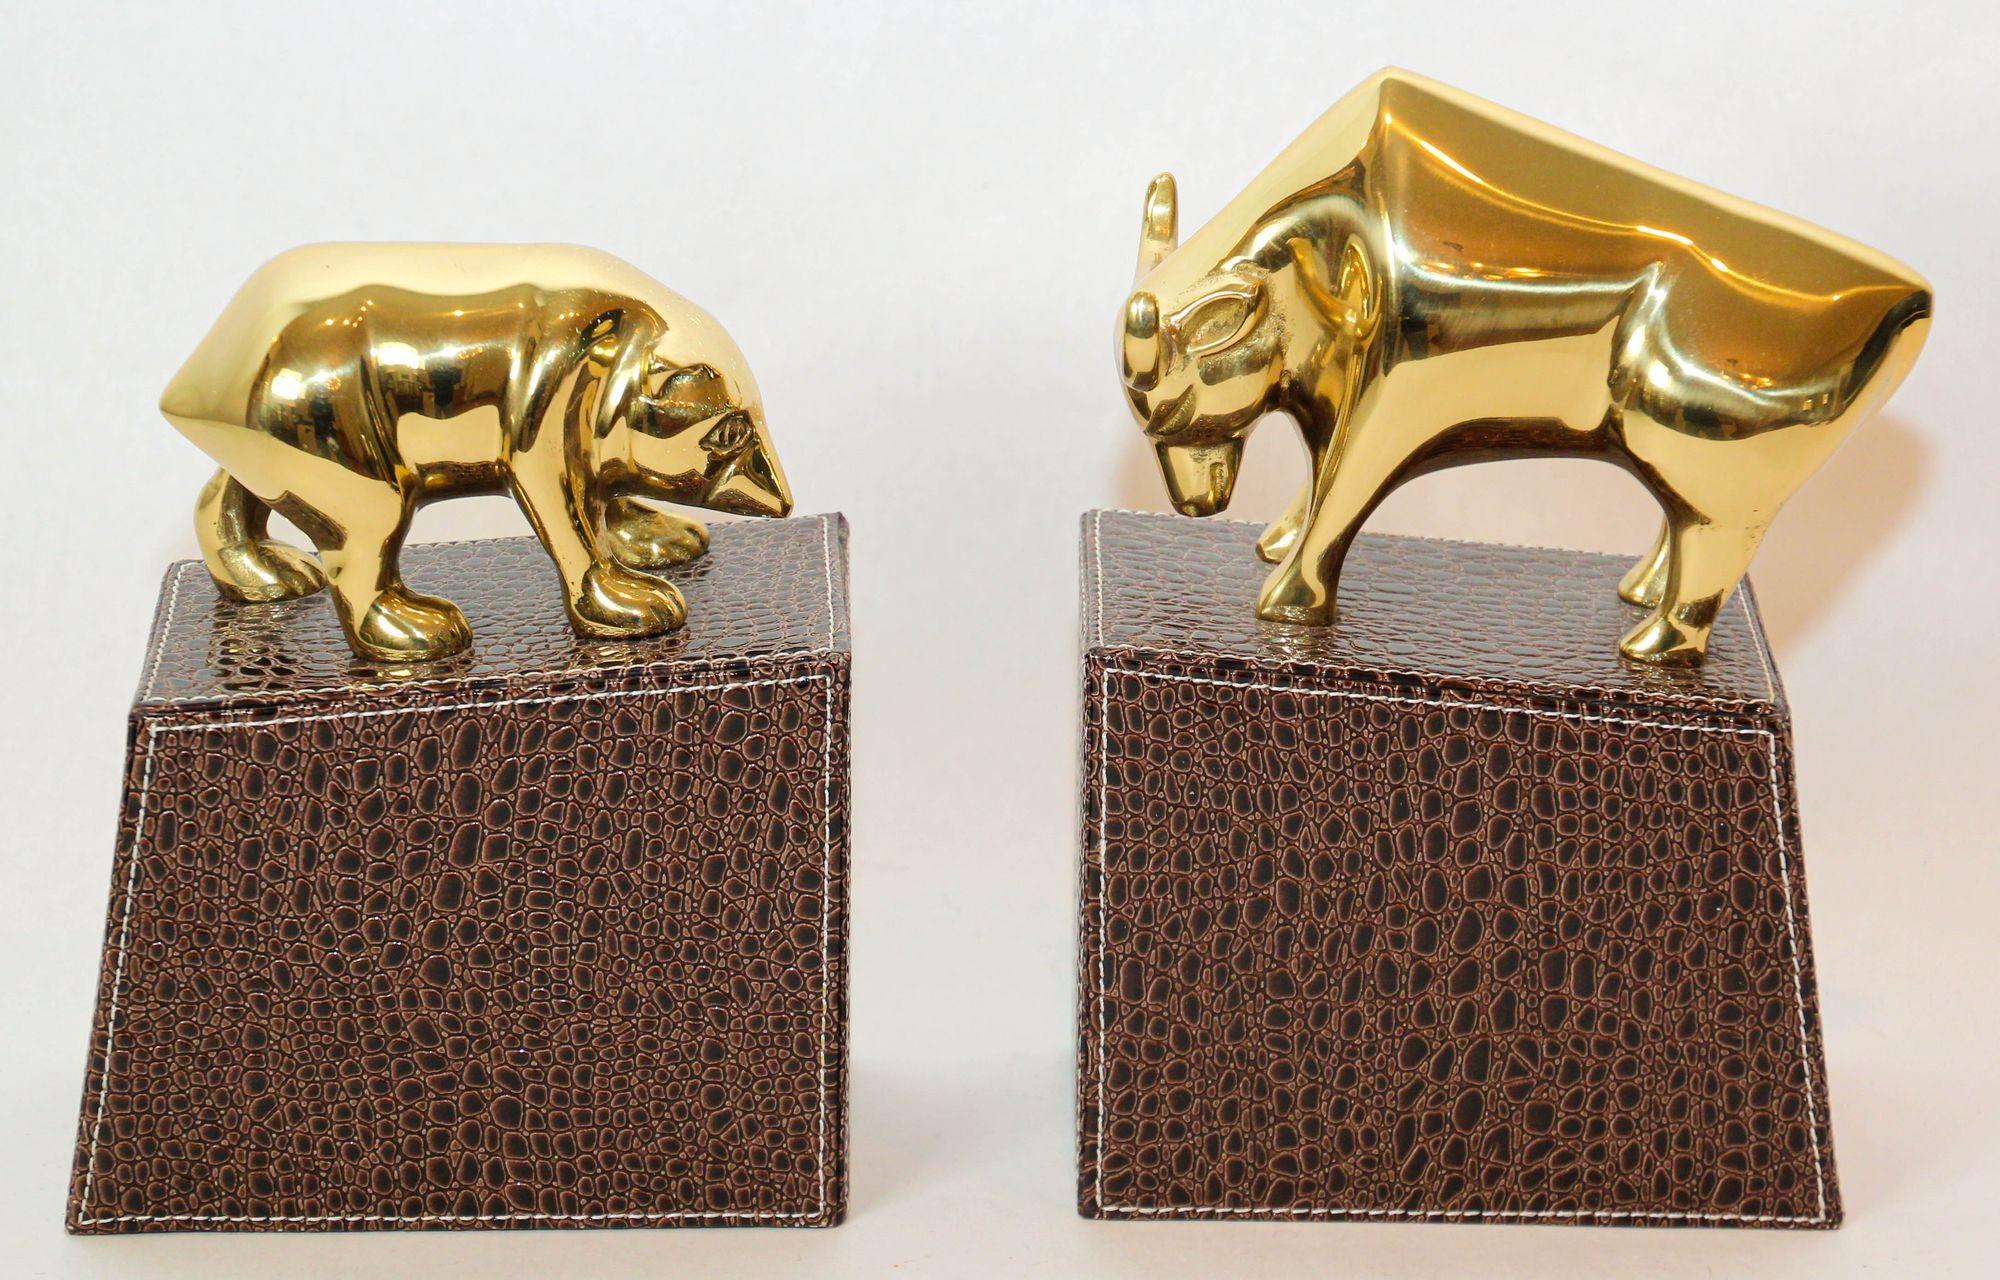 Vintage polished brass bull and bear bookends paperweights Wall Street cedor.
Great on any desk the polished brass bull and bear on stitched faux embossed leather stands bookends or paperweights.
Great decorative brass book ends. Wall Street bull